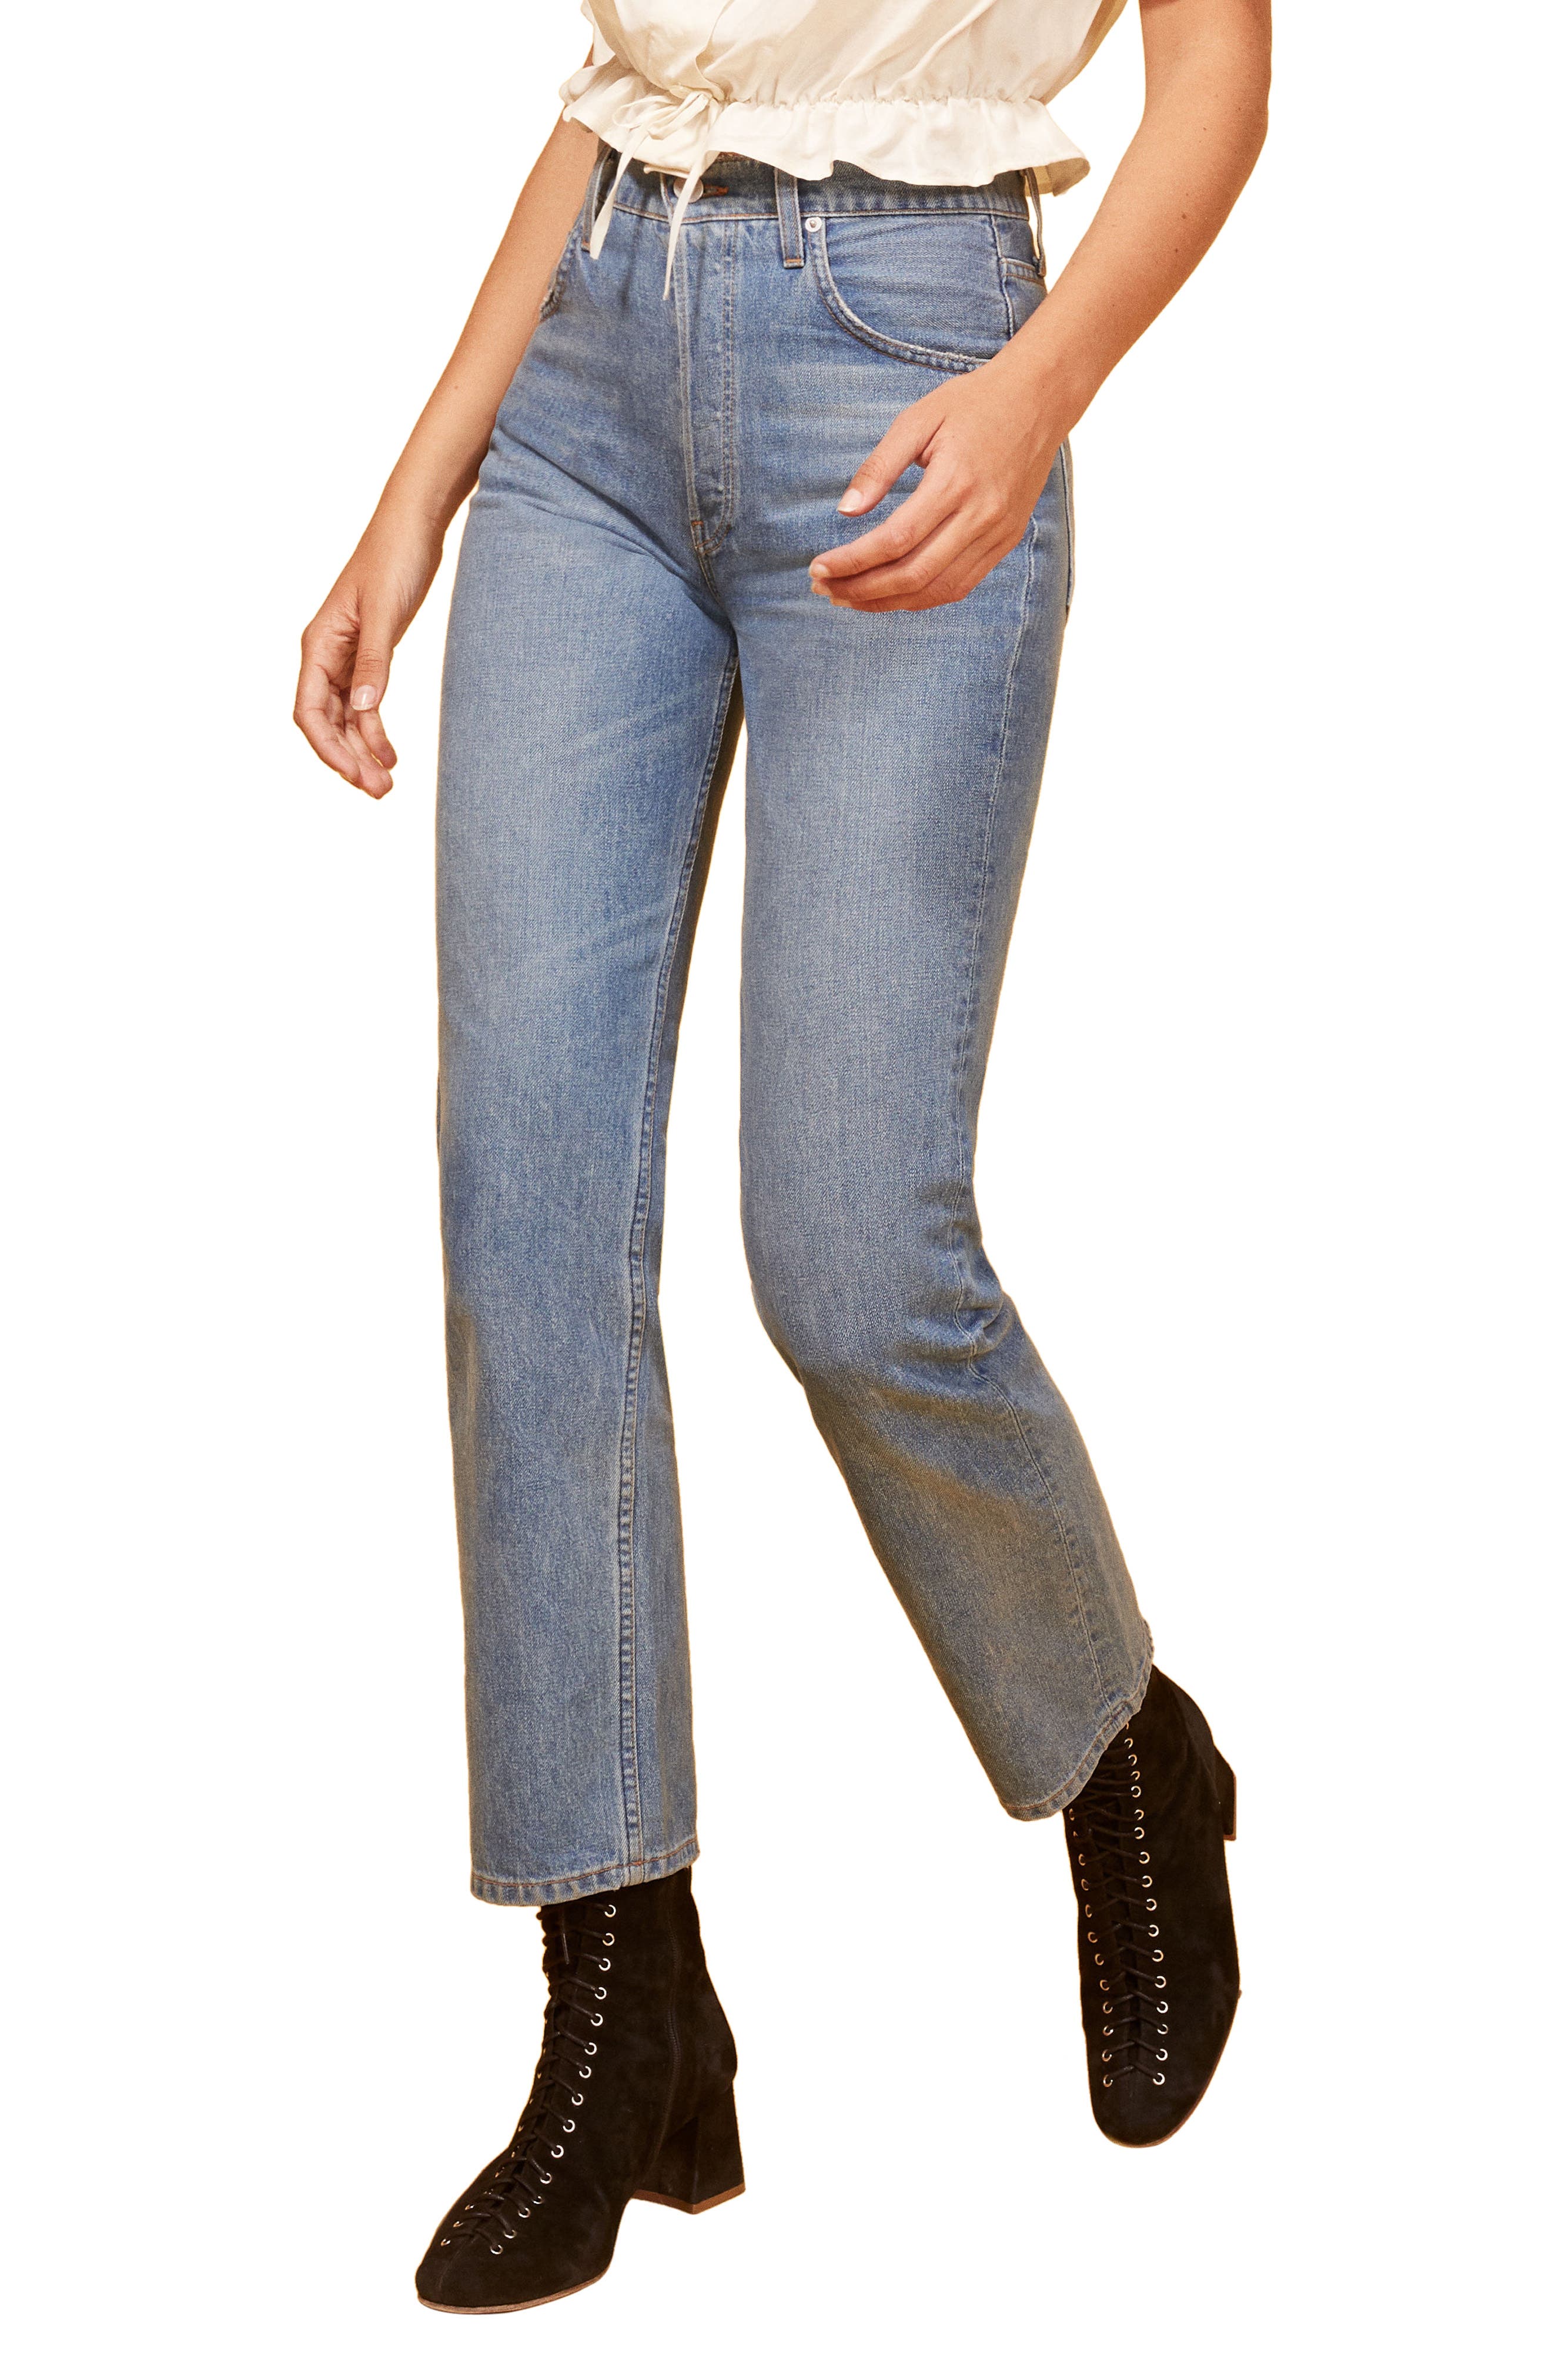 cynthia high relaxed jean reformation